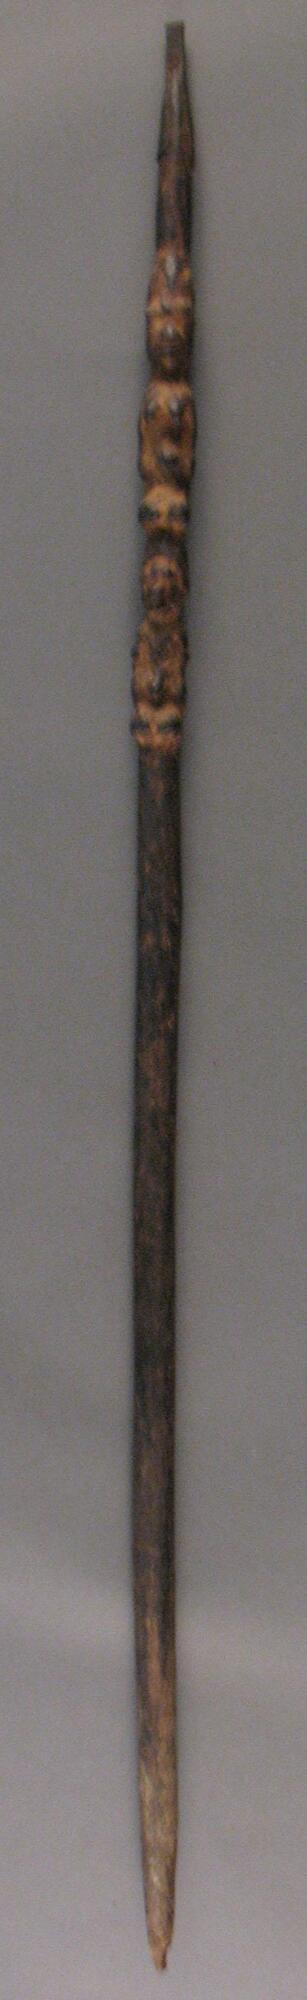 Carved wooden staff topped by a piece of metal with two standing human figures along the top third. The figures appear to be a woman and below her, a man. The bottom of the staff ends in a point. 